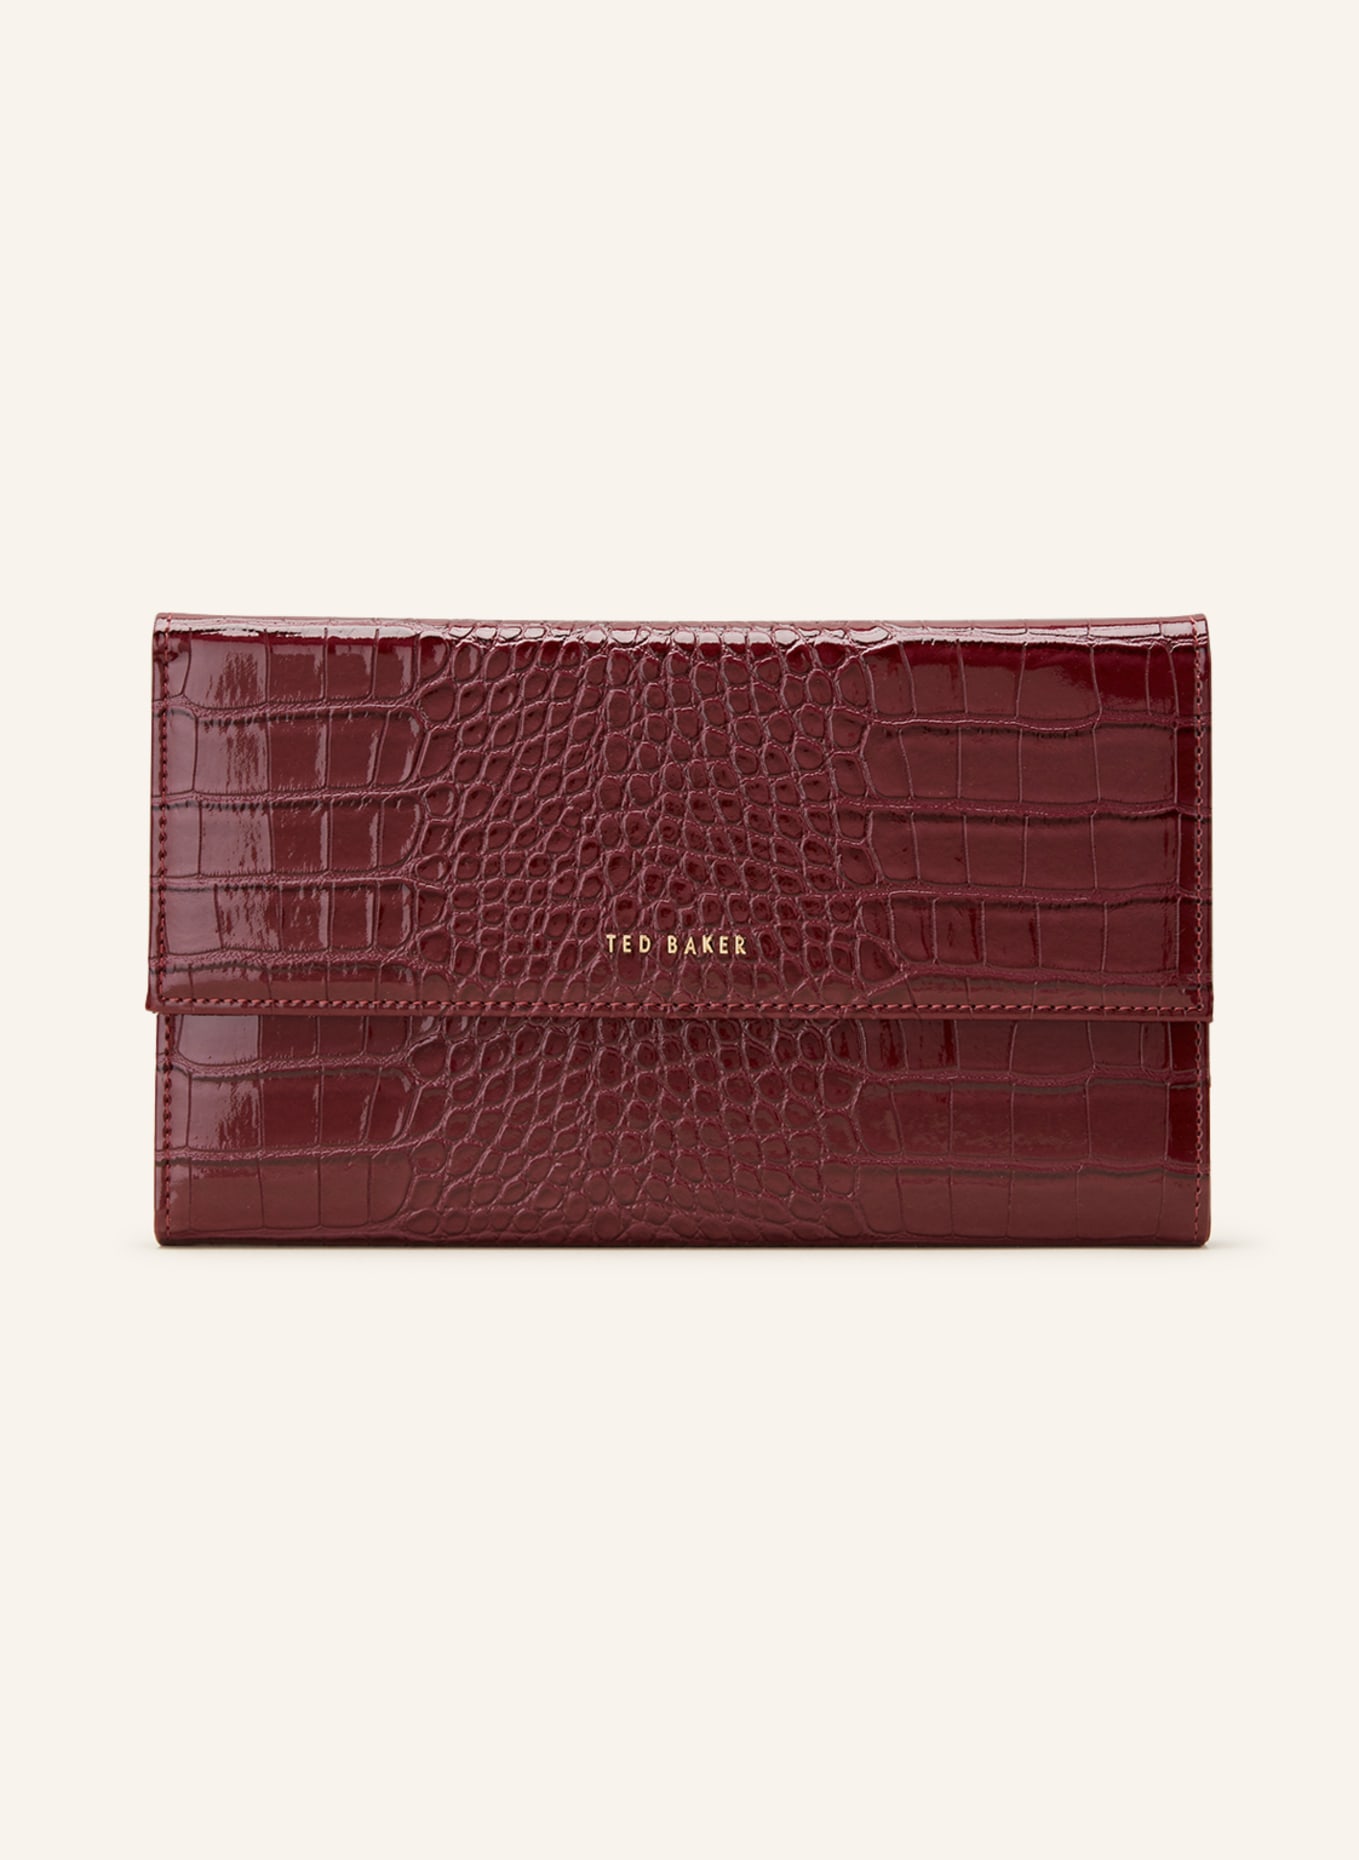  Ted Baker Clutch